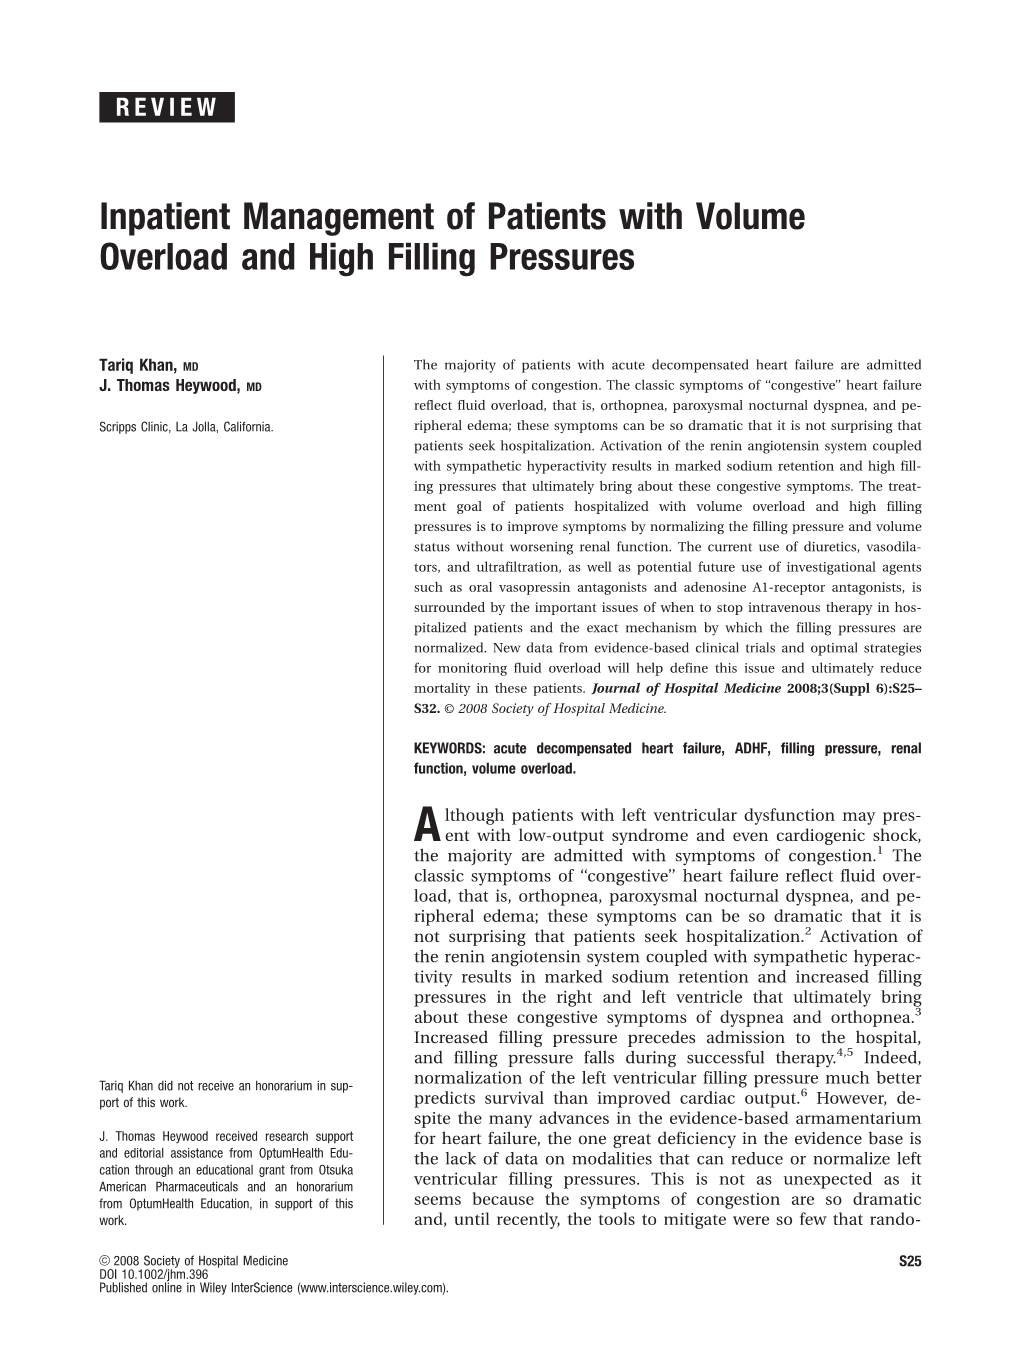 Inpatient Management of Patients with Volume Overload and High Filling Pressures